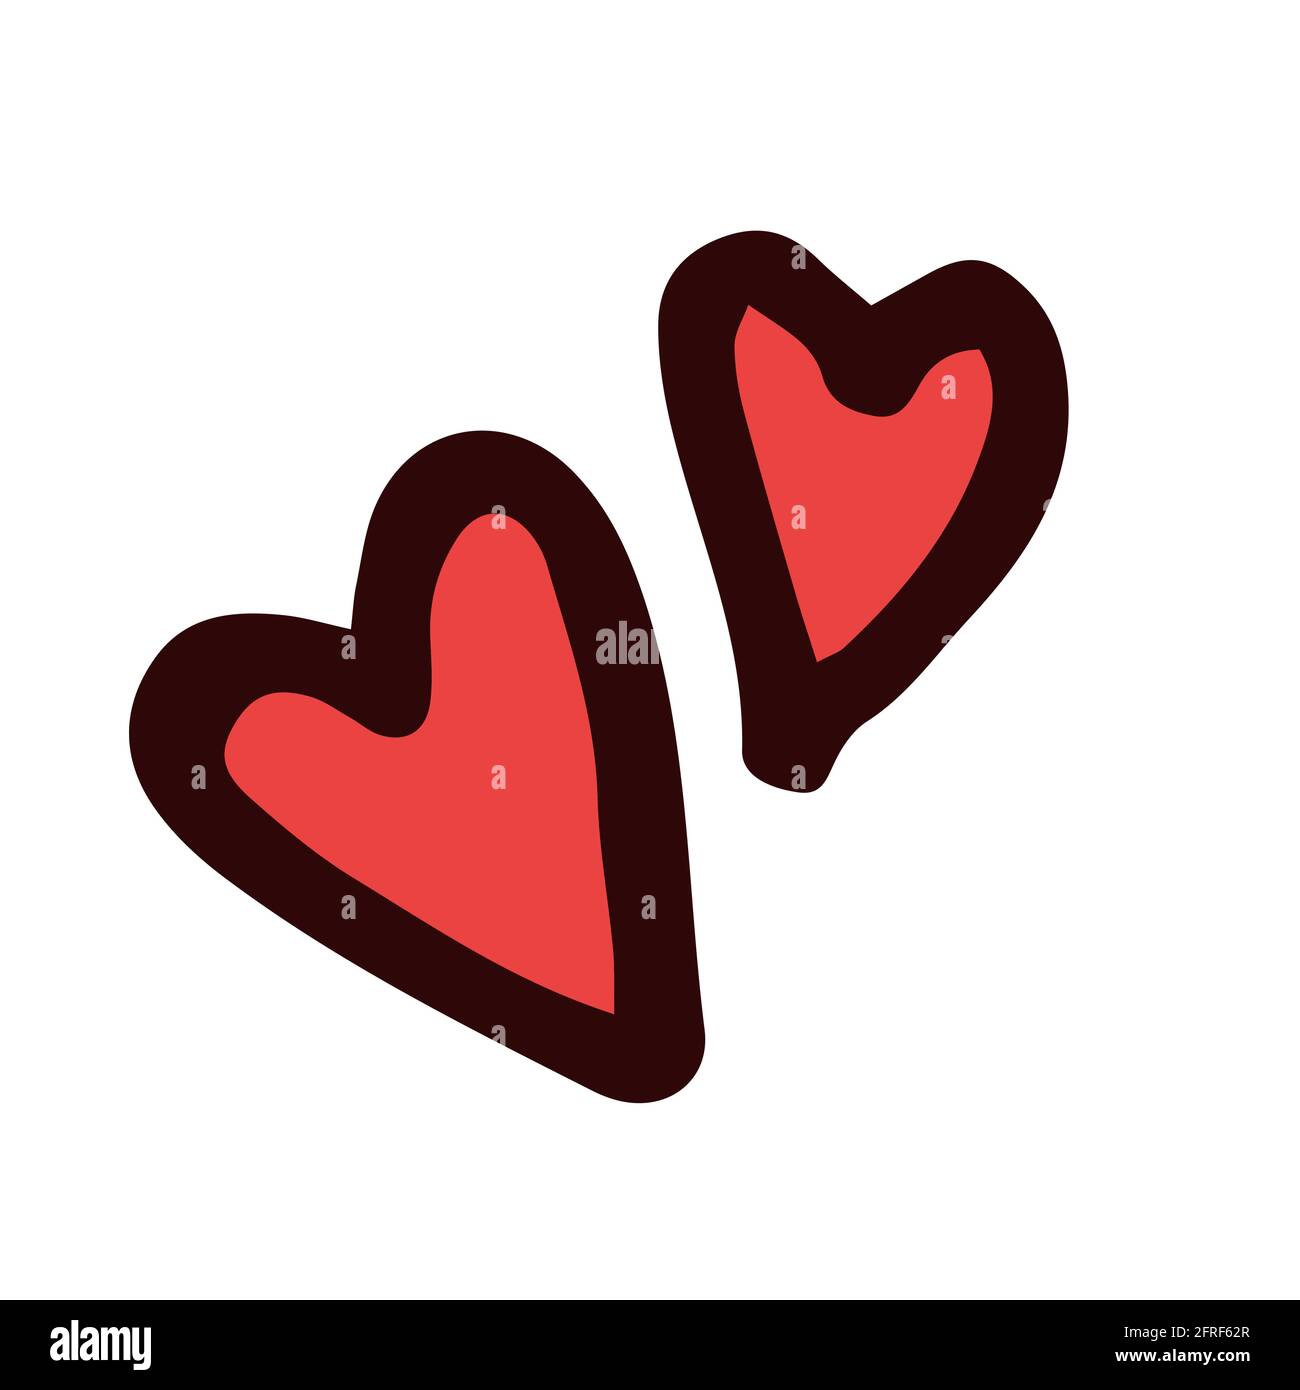 Hearts. illustration. Cartoon style sketch love. Hand outline drawing. Funny cute background illustration. vector Stock Vector